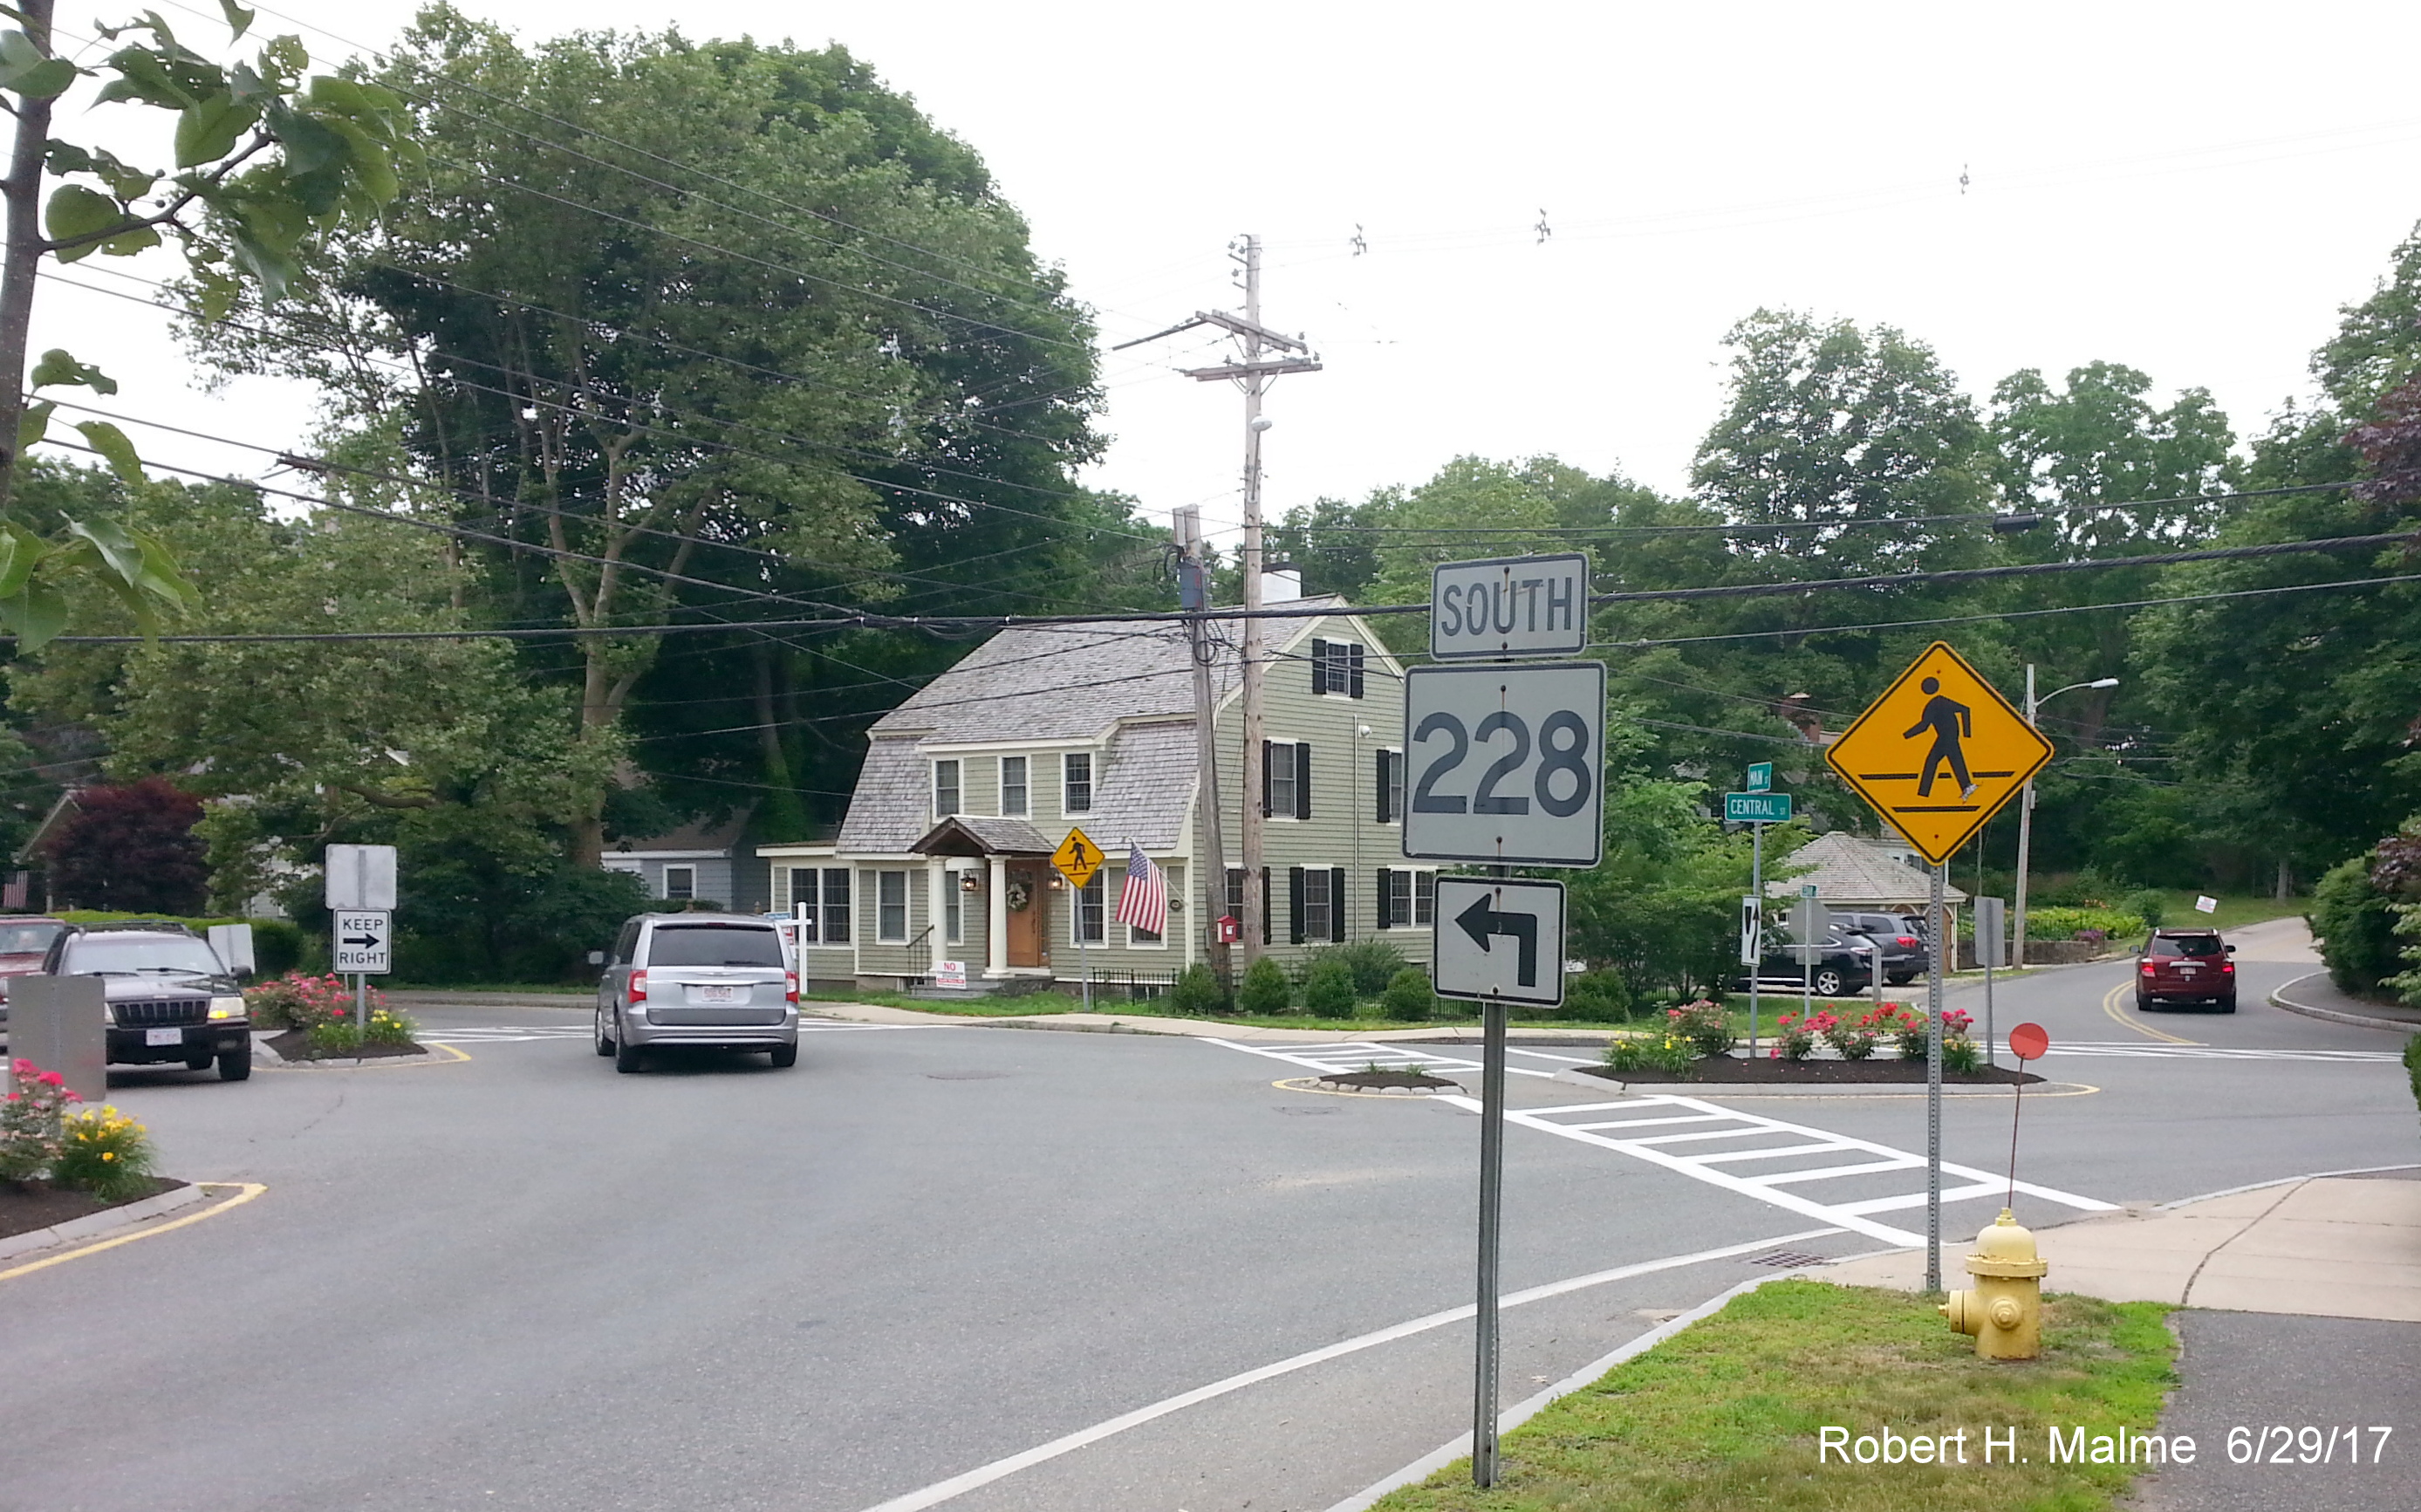 Image of old South MA 228 trailblazer at corner of Main and Central Streets in Hingham